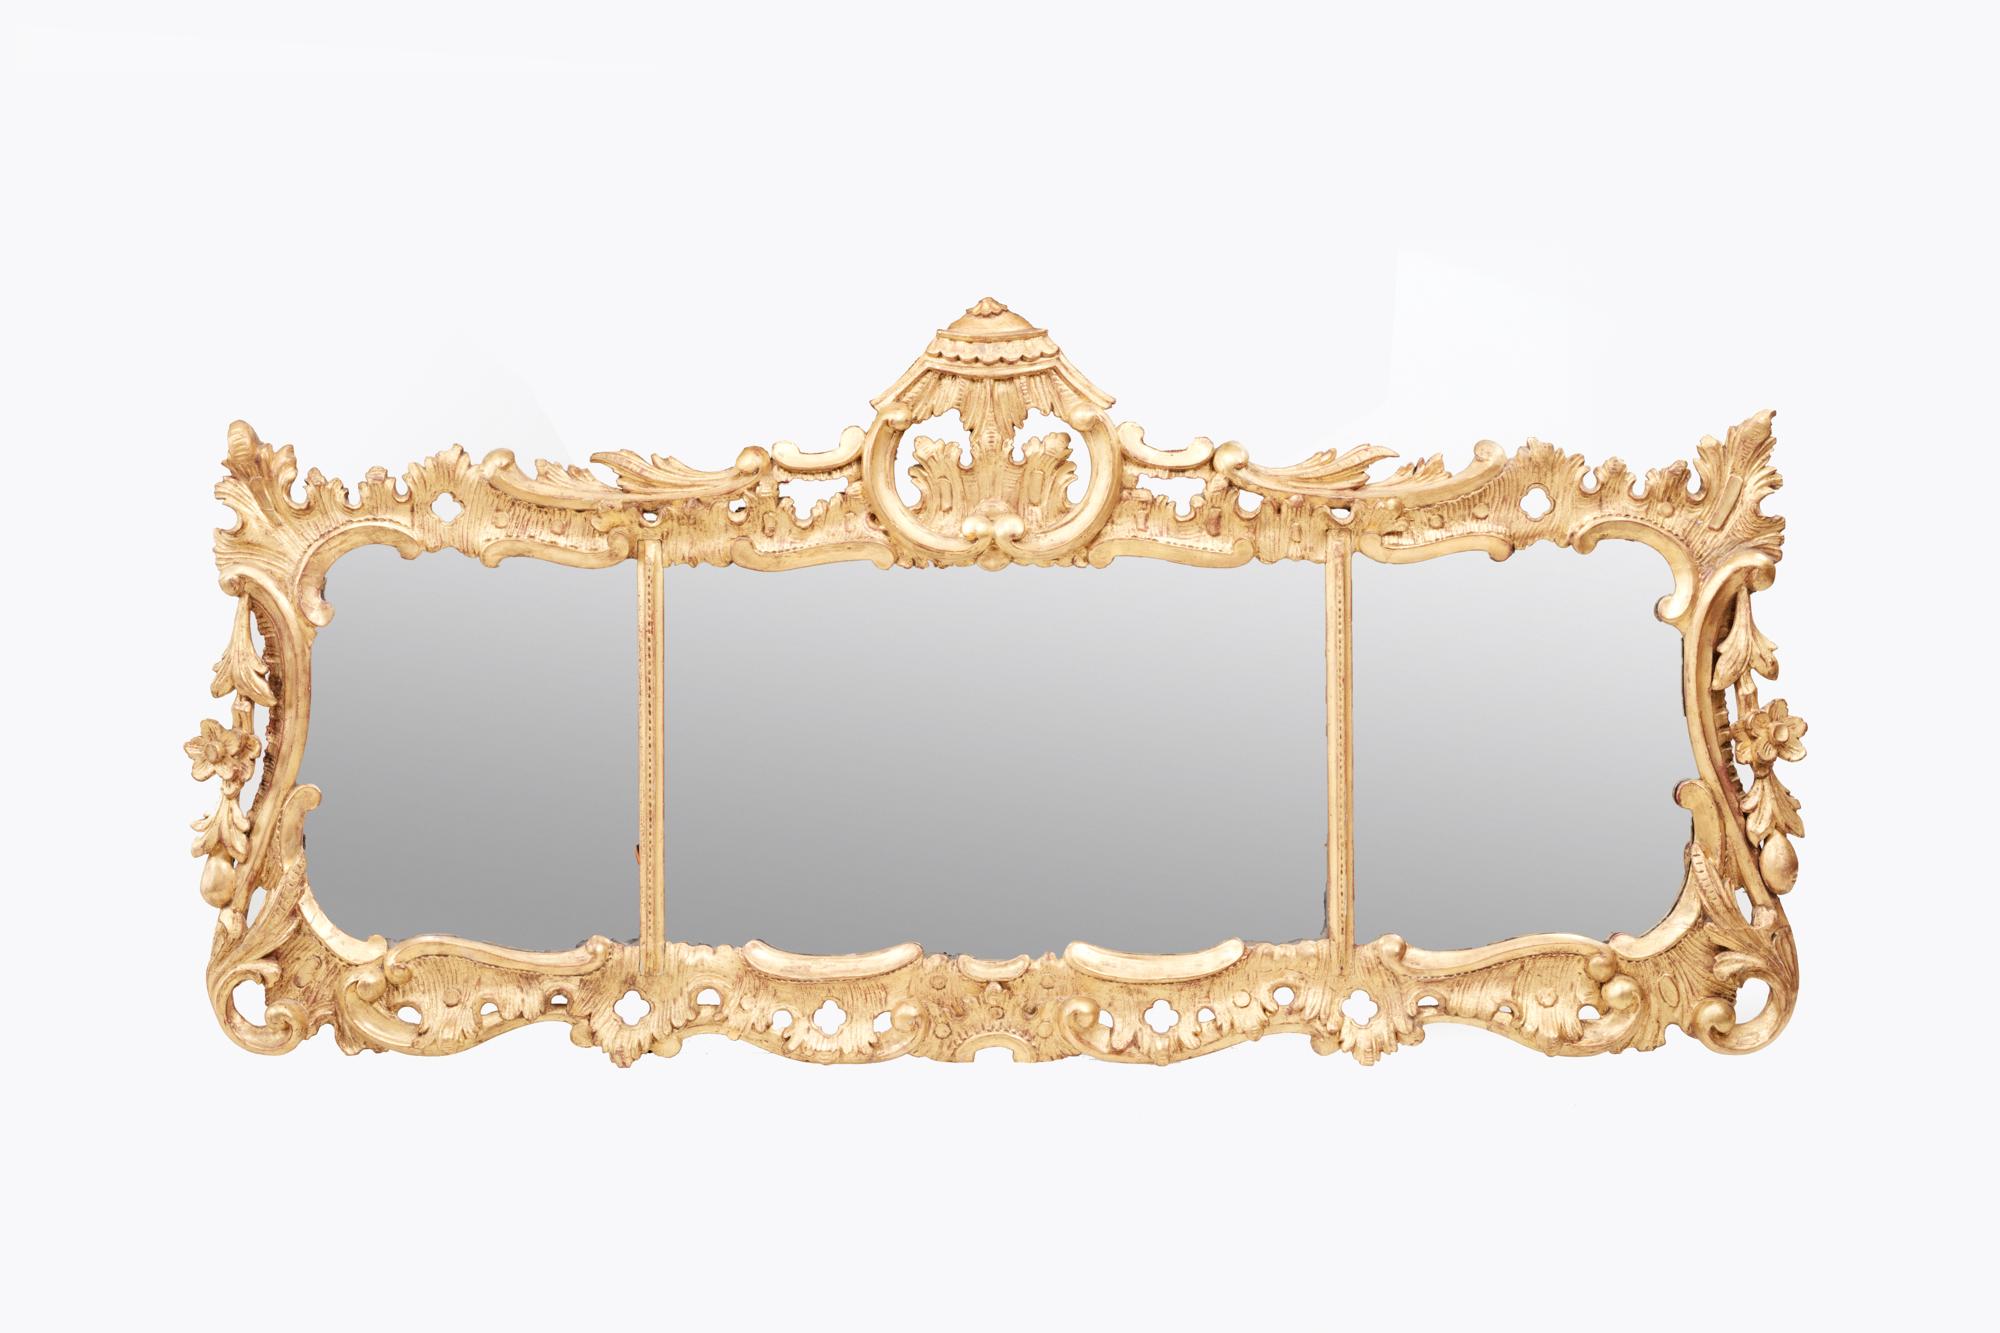 18th Century gilt overmantel mirror with central stylised pagoda decoration. The three panels are separated by simple gilt beaded bar details and surrounded by an ornate gilt wooden frame featuring acanthus leaf, floral and quatrefoil decoration.